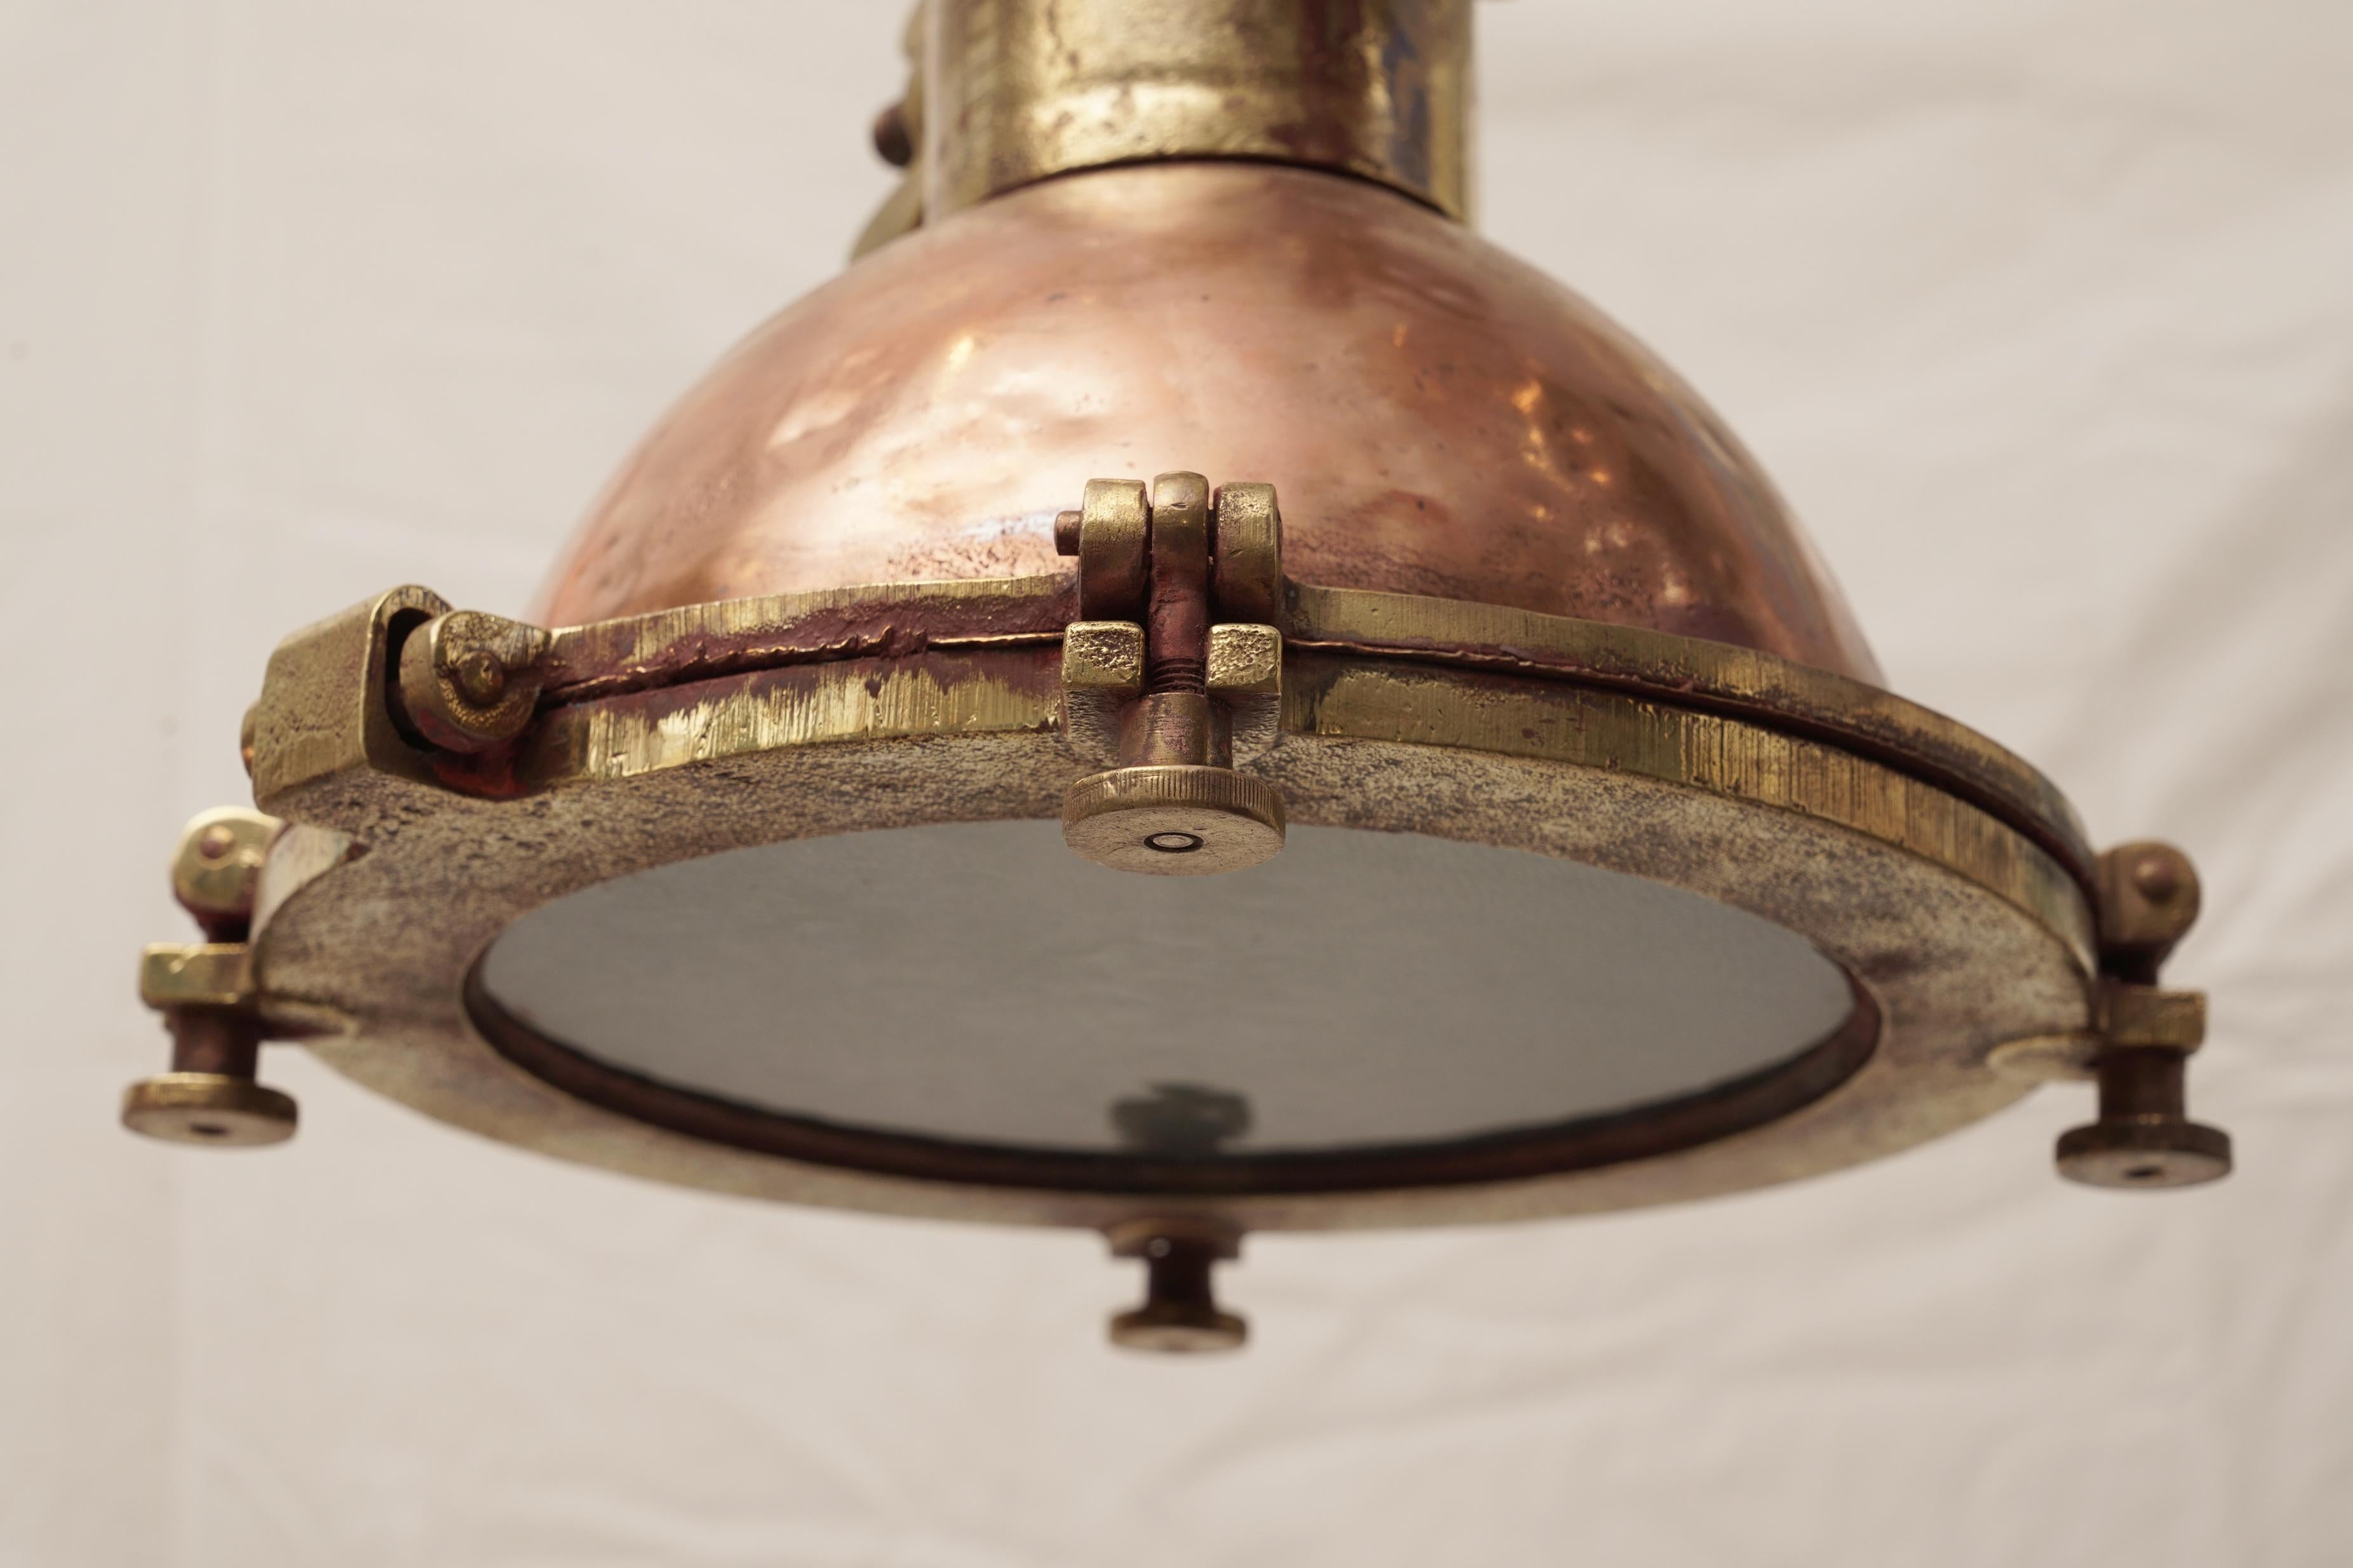 A copper and brass deck light used on ship's to load and unload cargo at night. Hinged face plate and brass pivoting threaded devices (known as dogs) that releases the face plate for changing the light bulb.  The inside has reflective paint  which